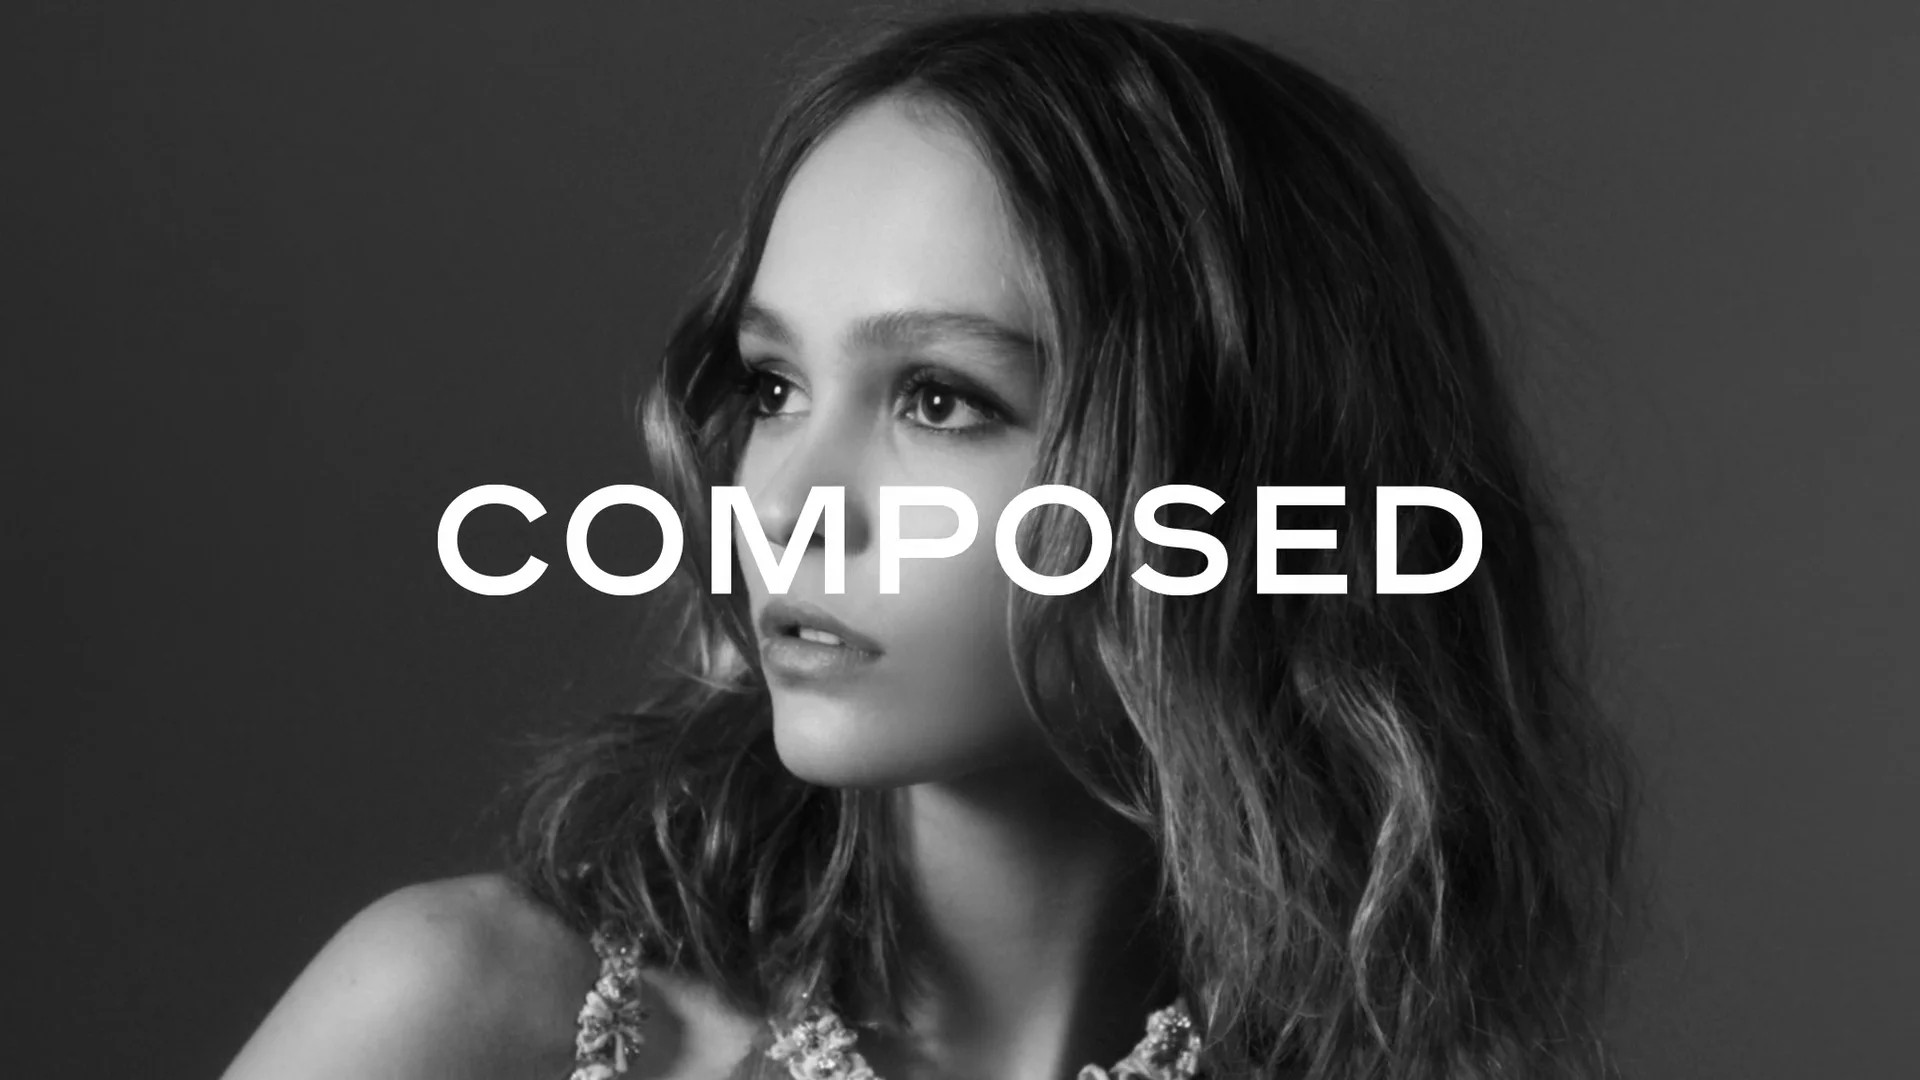 Chanel No5 feat. Lilly Rose Depp. 90s on Vimeo